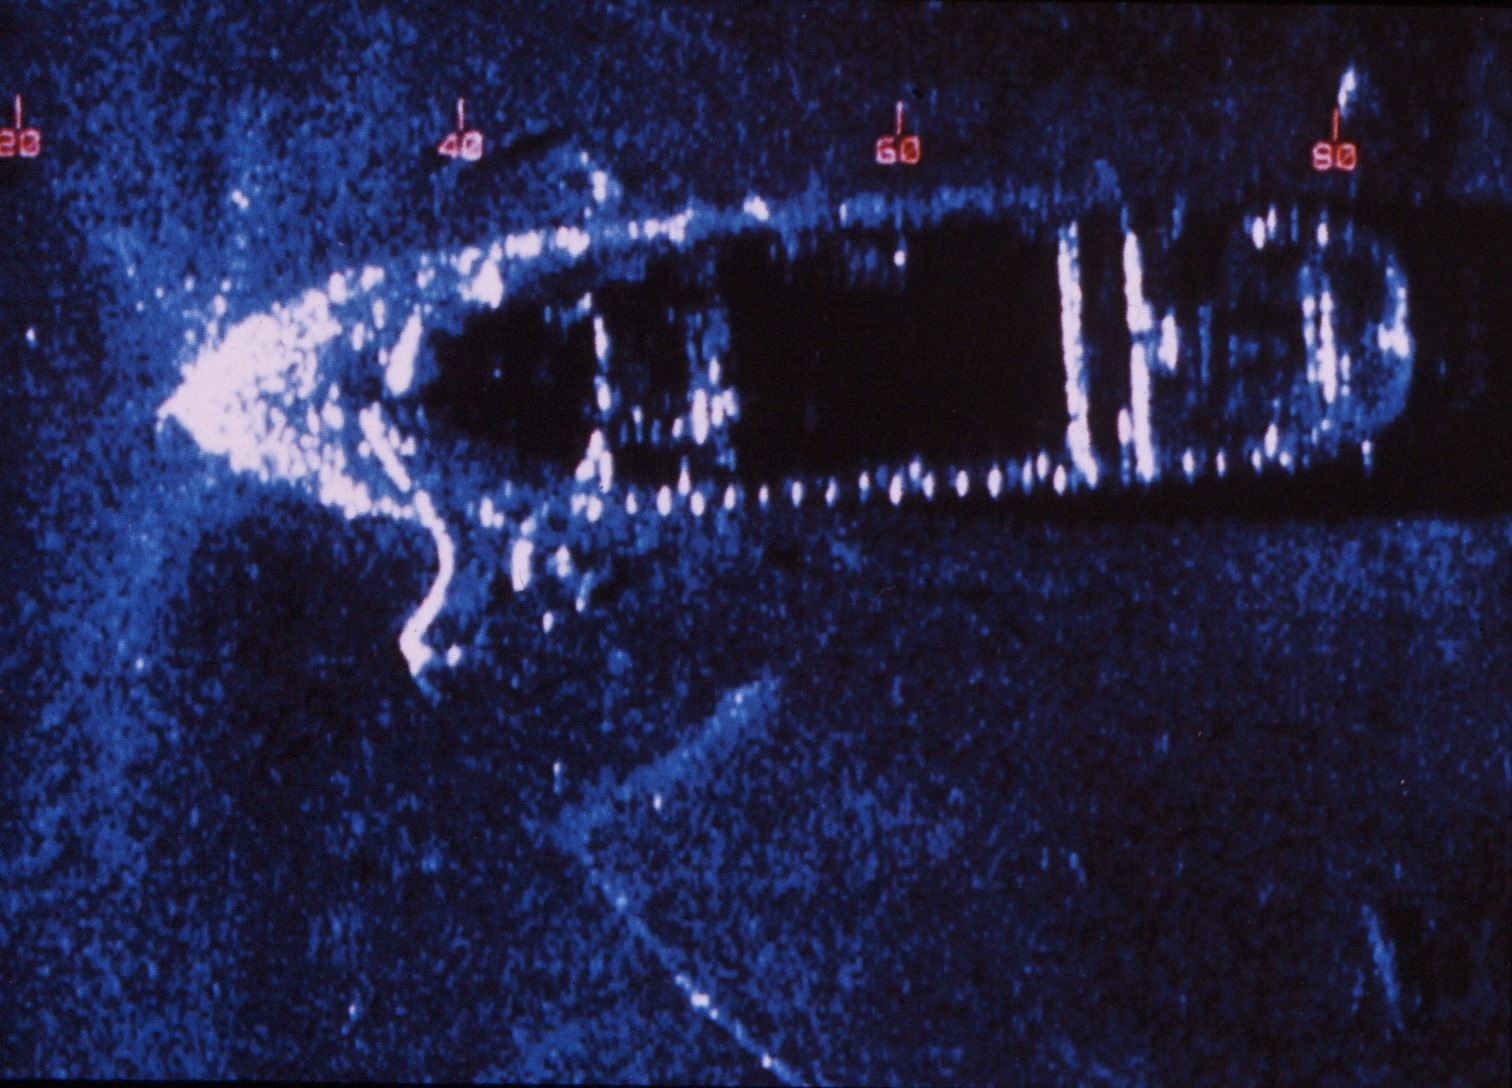 Sonar image of the Superior Straights lying in 27 meters of water